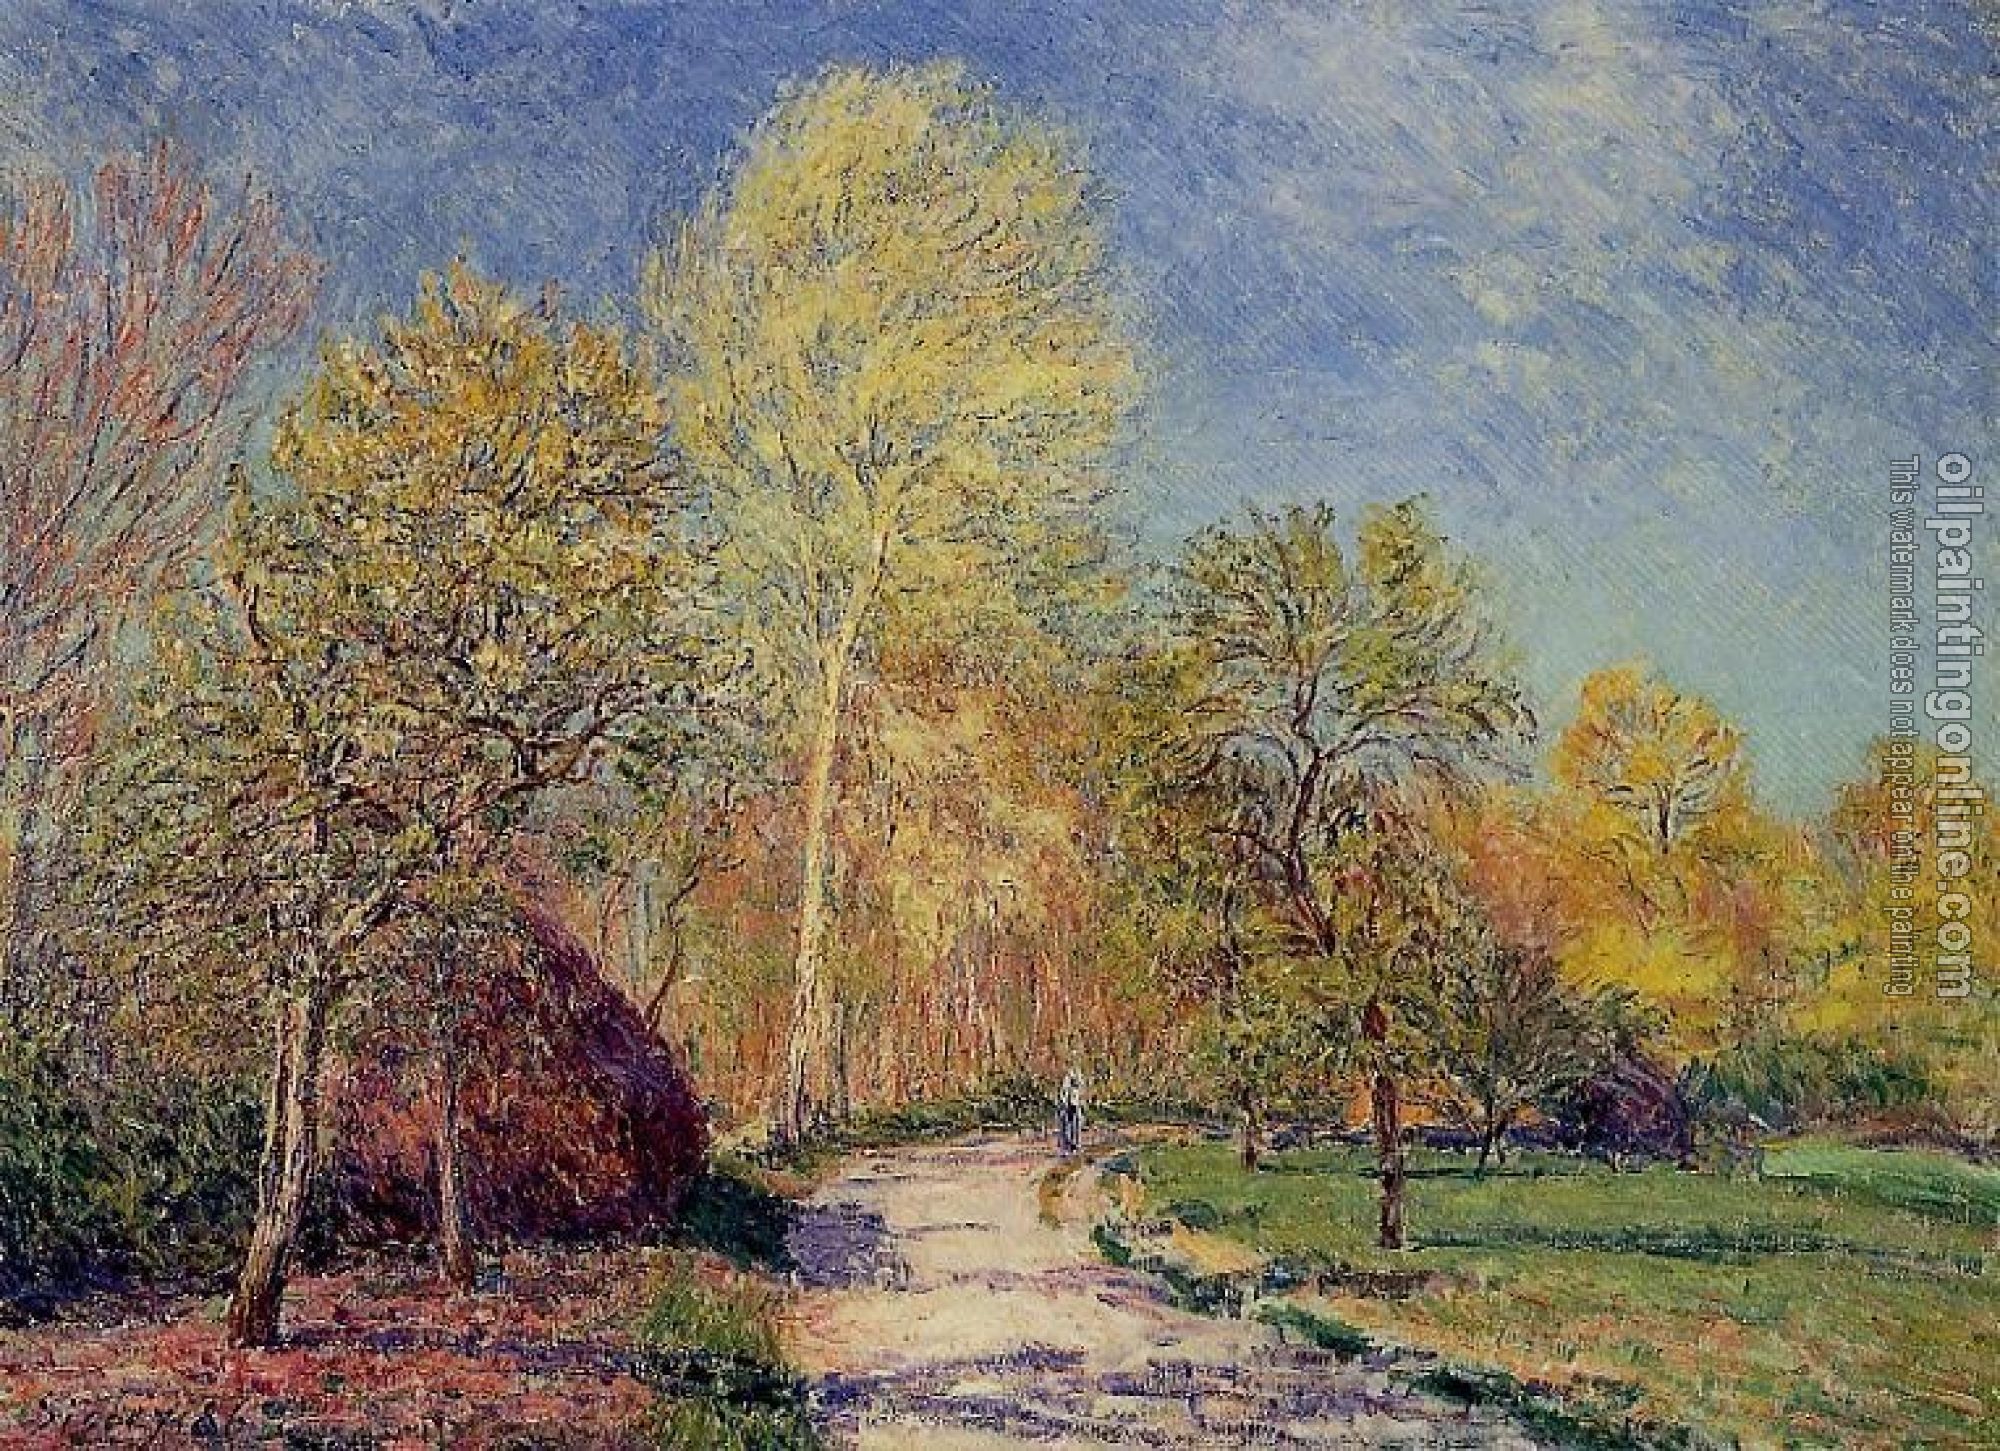 Sisley, Alfred - A May Morning in Moret